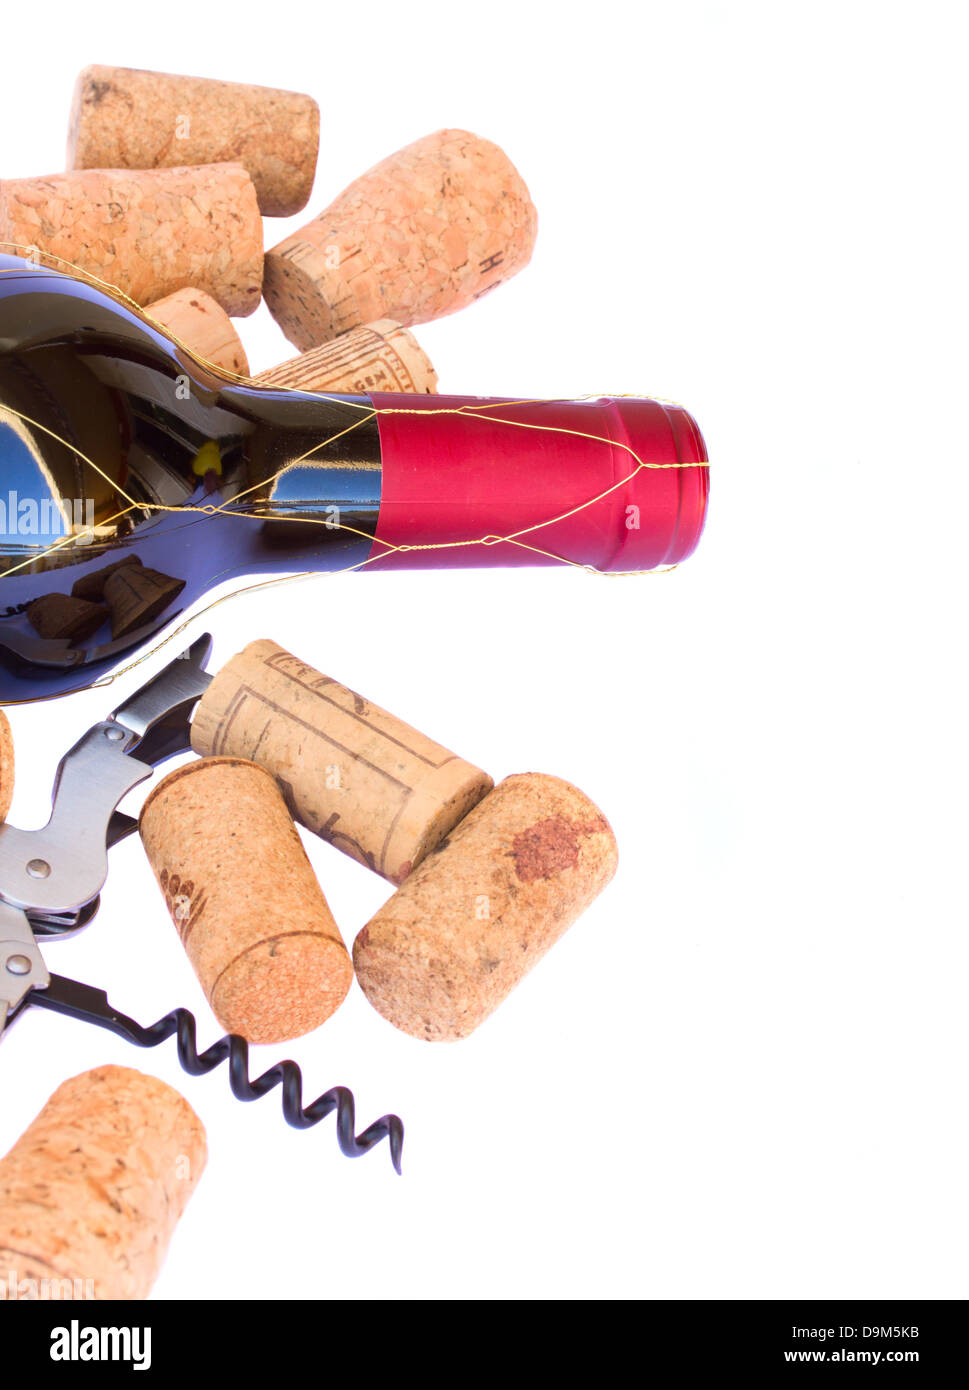 bottle ofred  wine wth corks Stock Photo